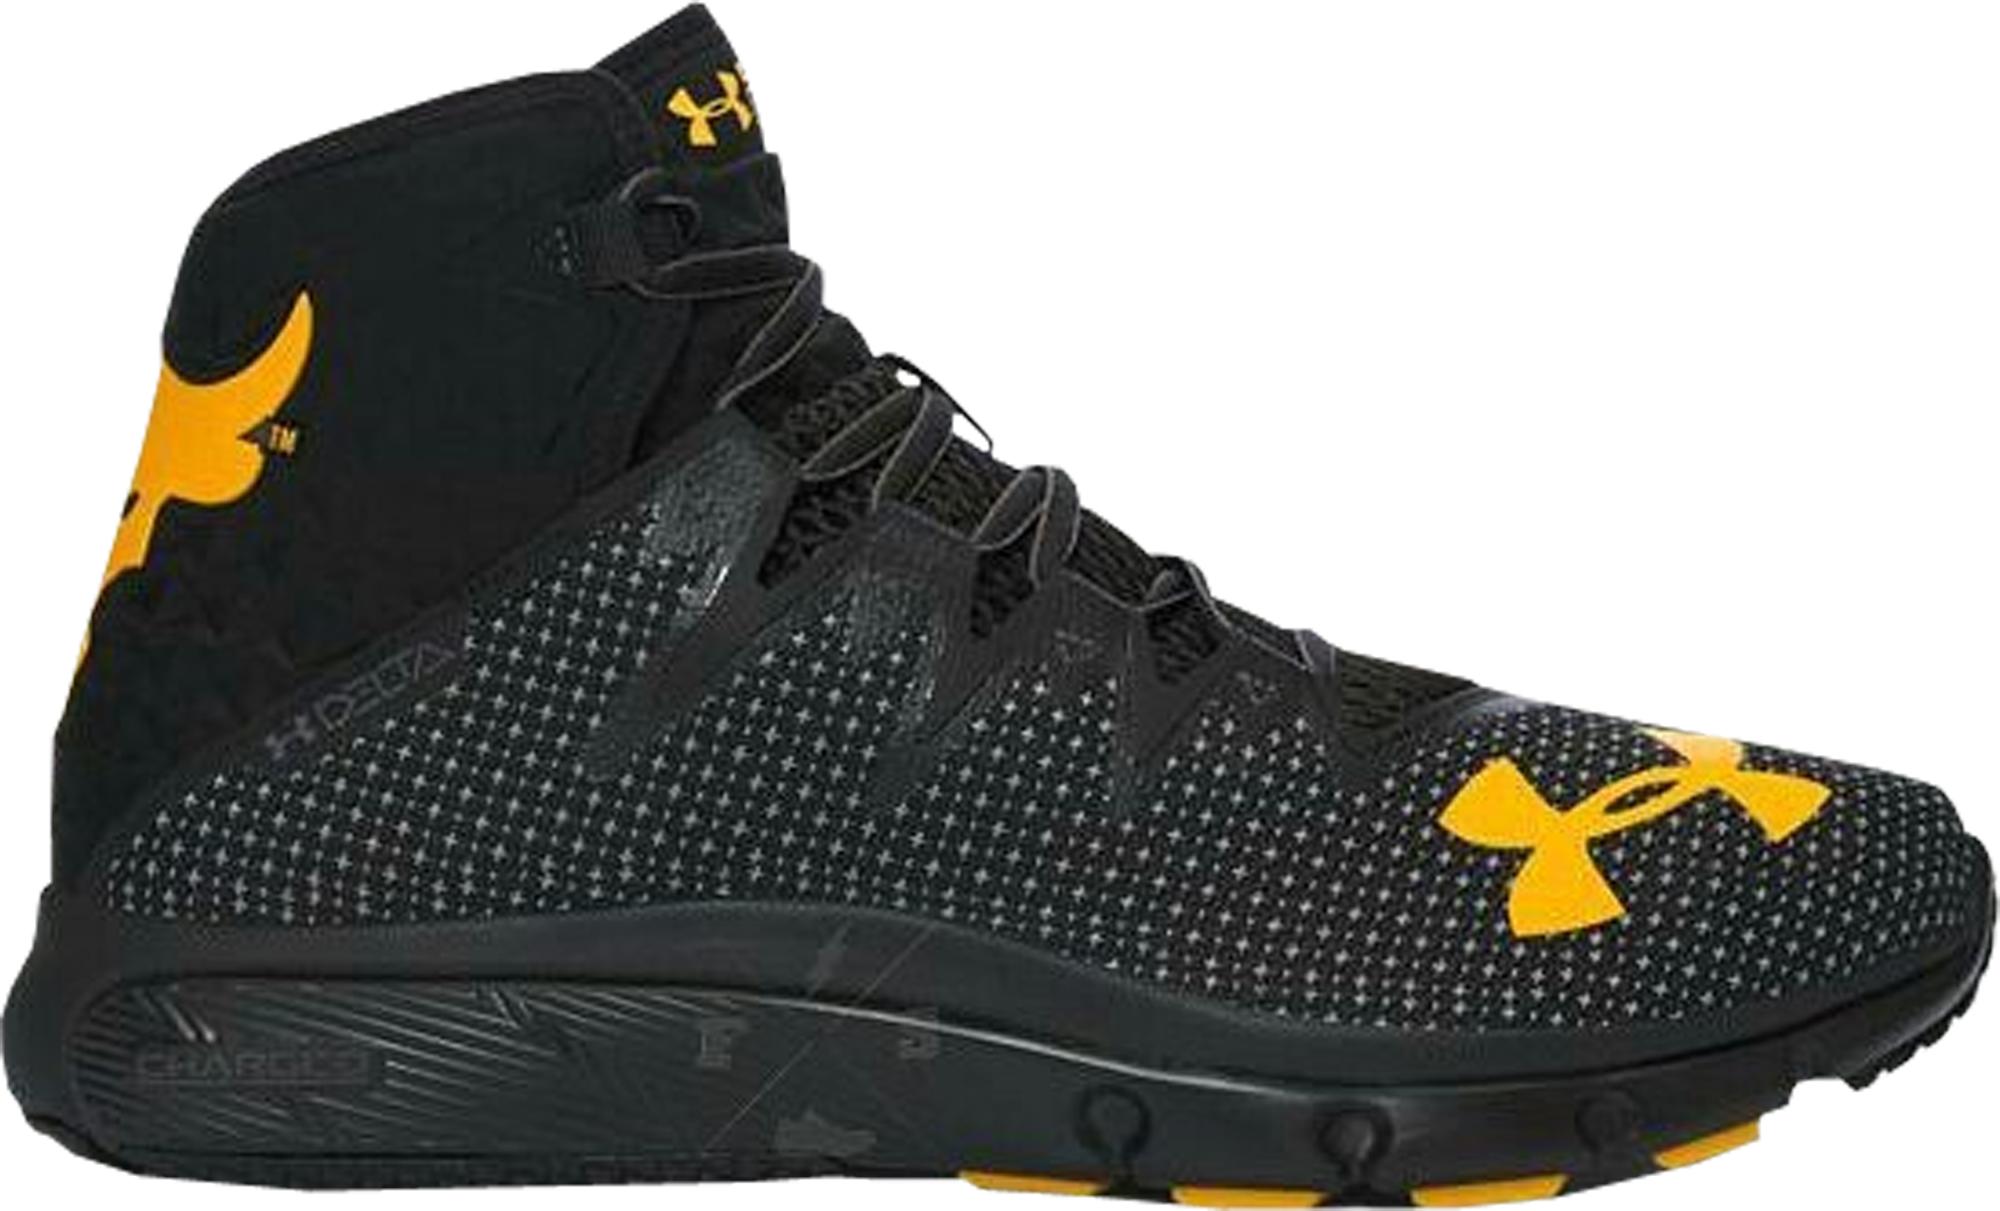 Under Armour The Rock Delta Black Yellow - StockX News